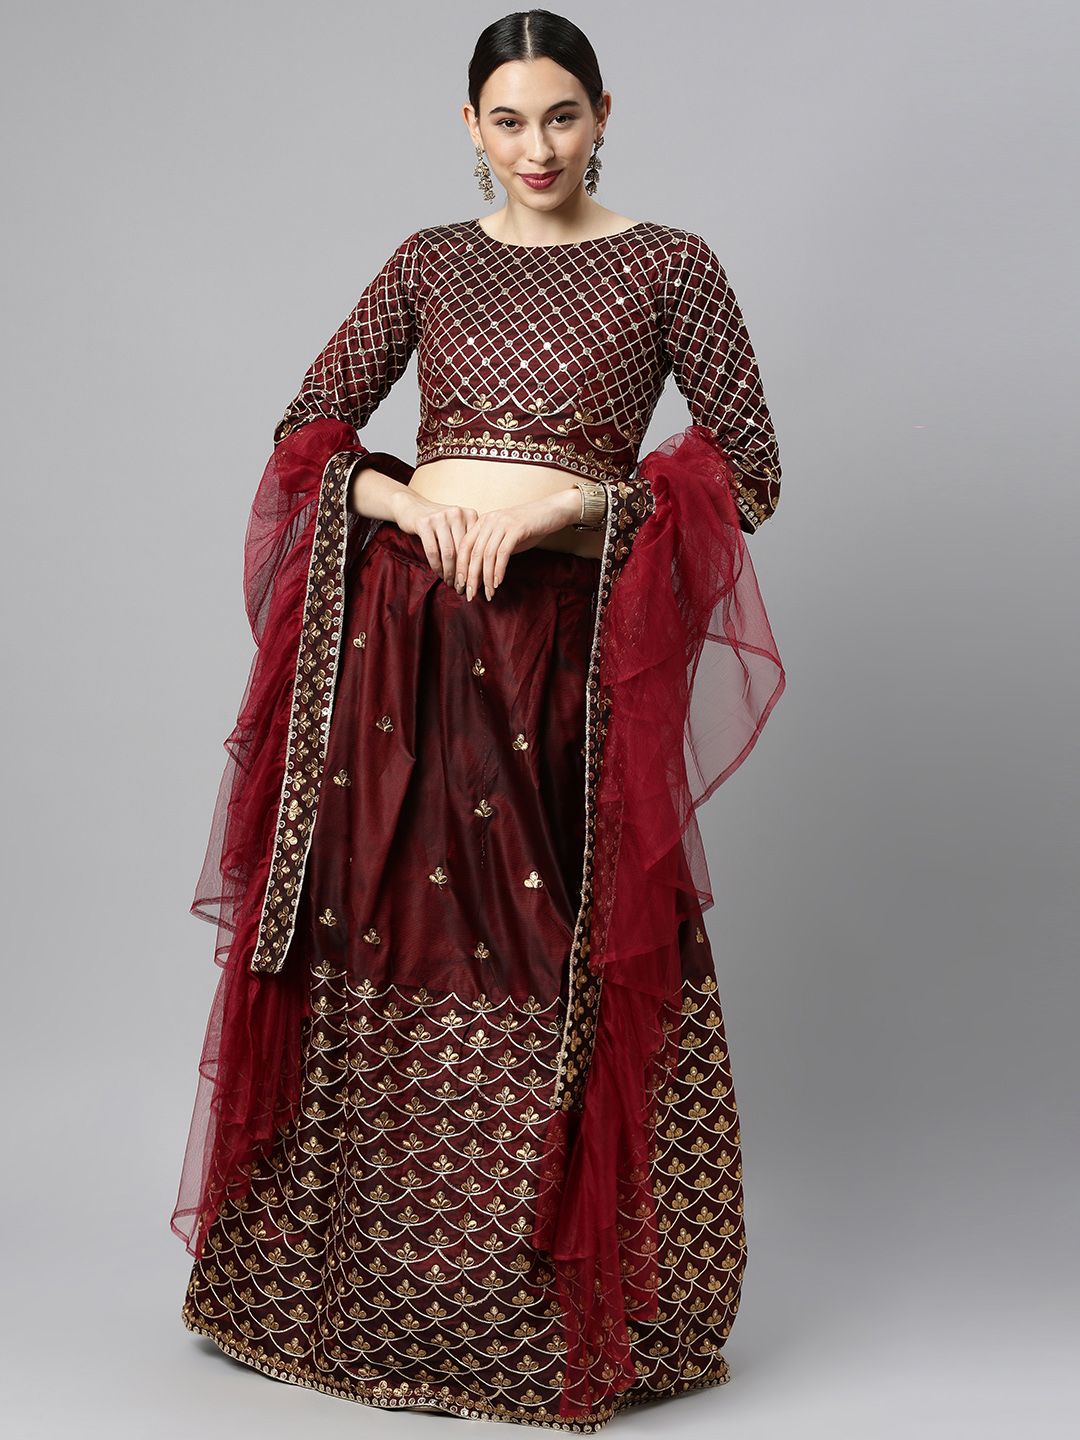 DIVASTRI Maroon Embellished Thread Work Semi-Stitched Lehenga & Unstitched Blouse With Dupatta Price in India